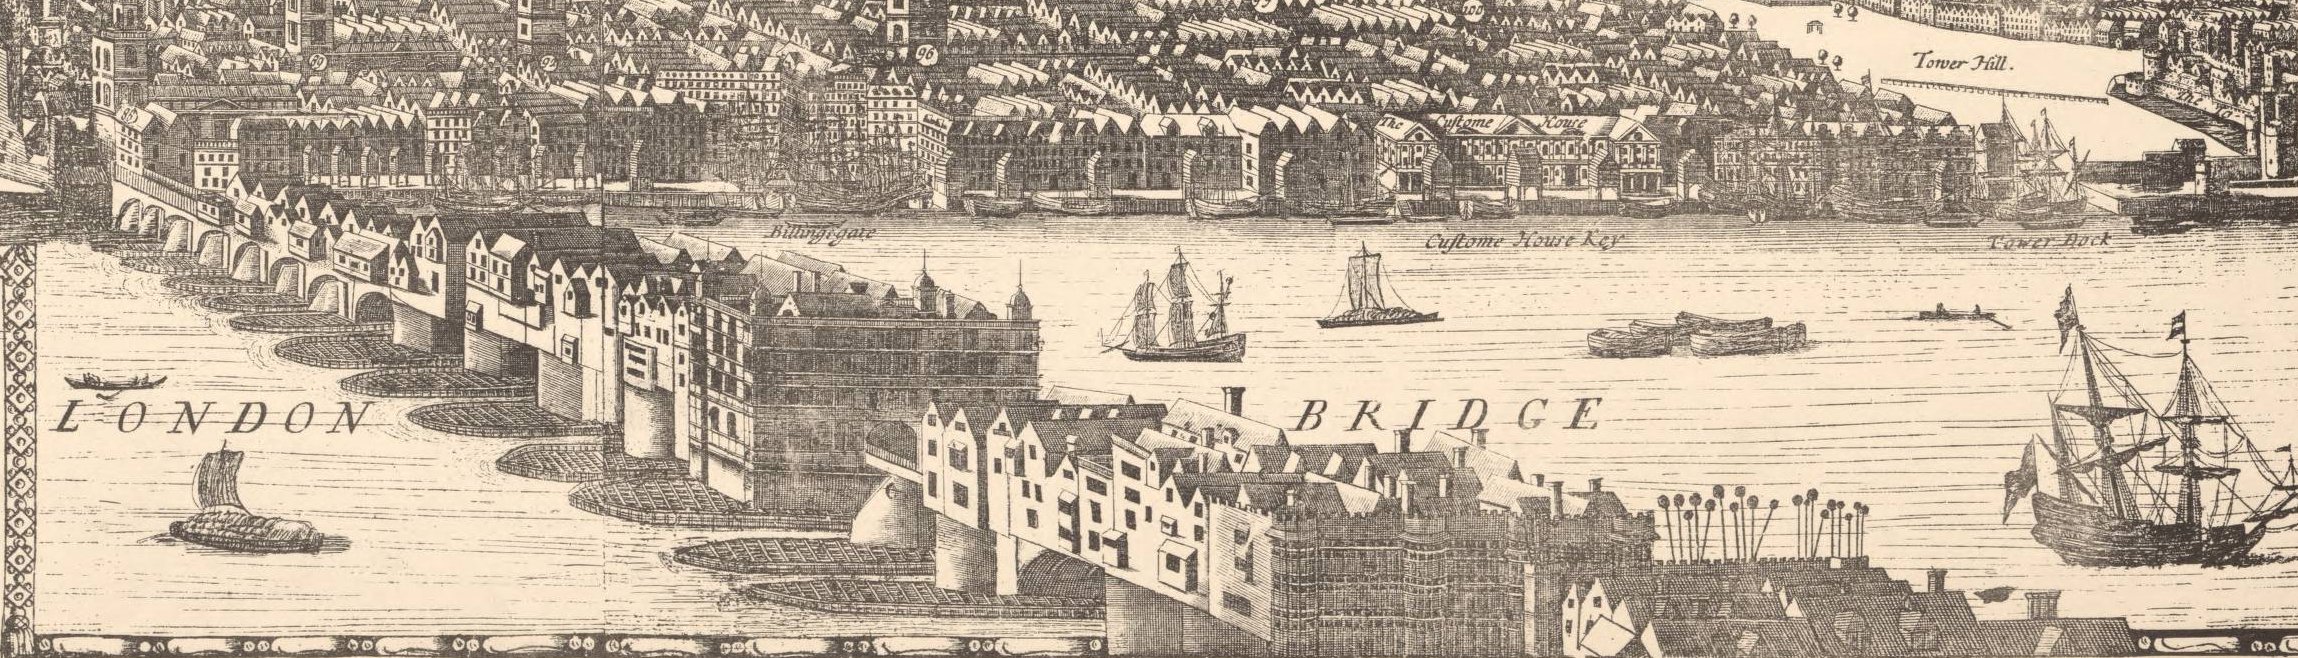 Drawing of London Bridge from a 1682 panorama. Public domain. From Wikipedia.